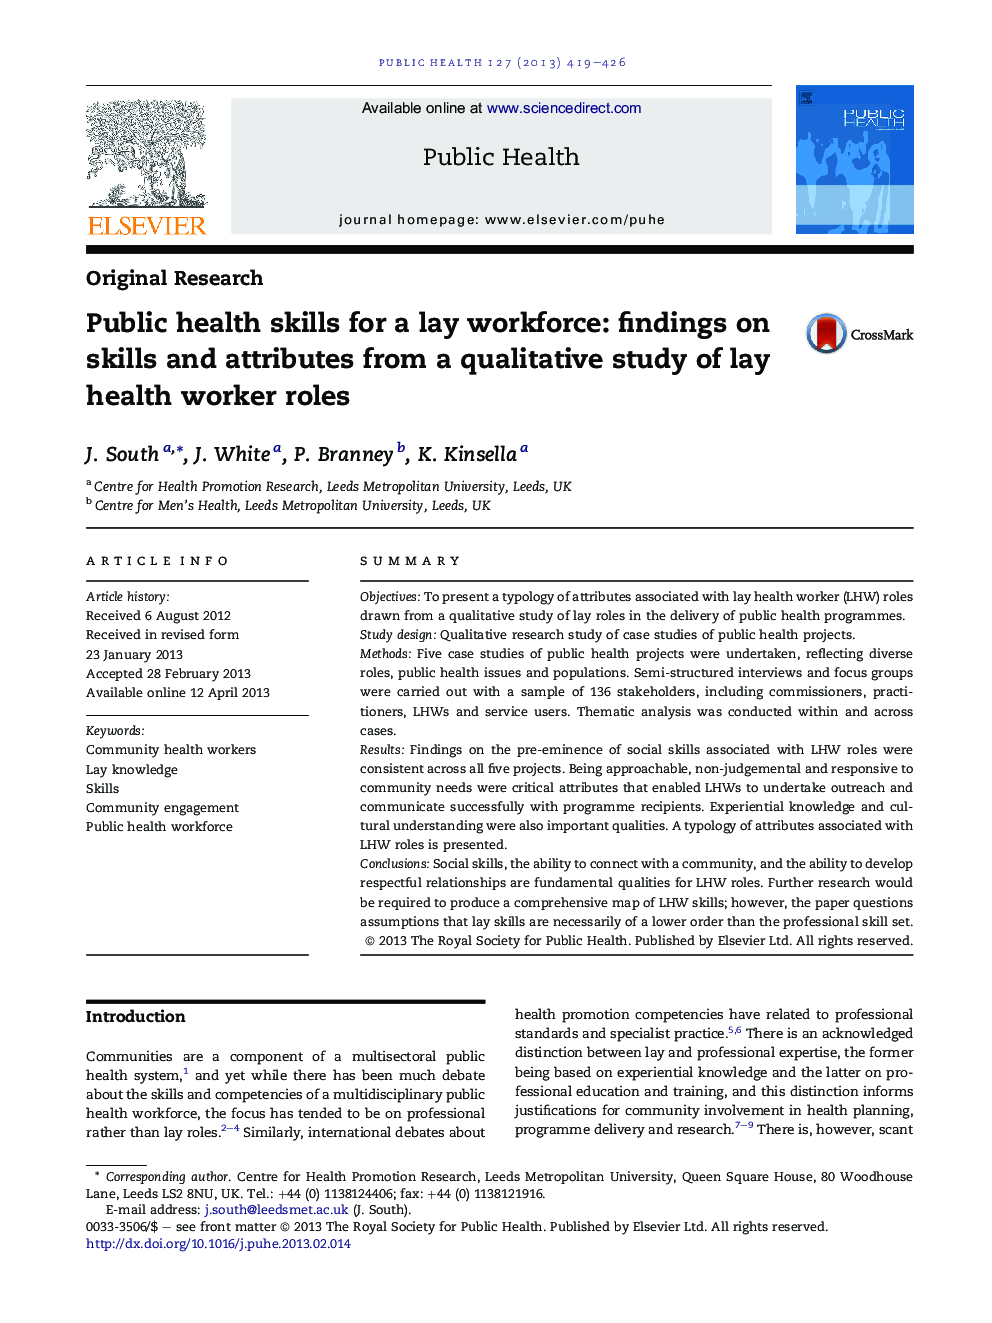 Public health skills for a lay workforce: findings on skills and attributes from a qualitative study of lay health worker roles